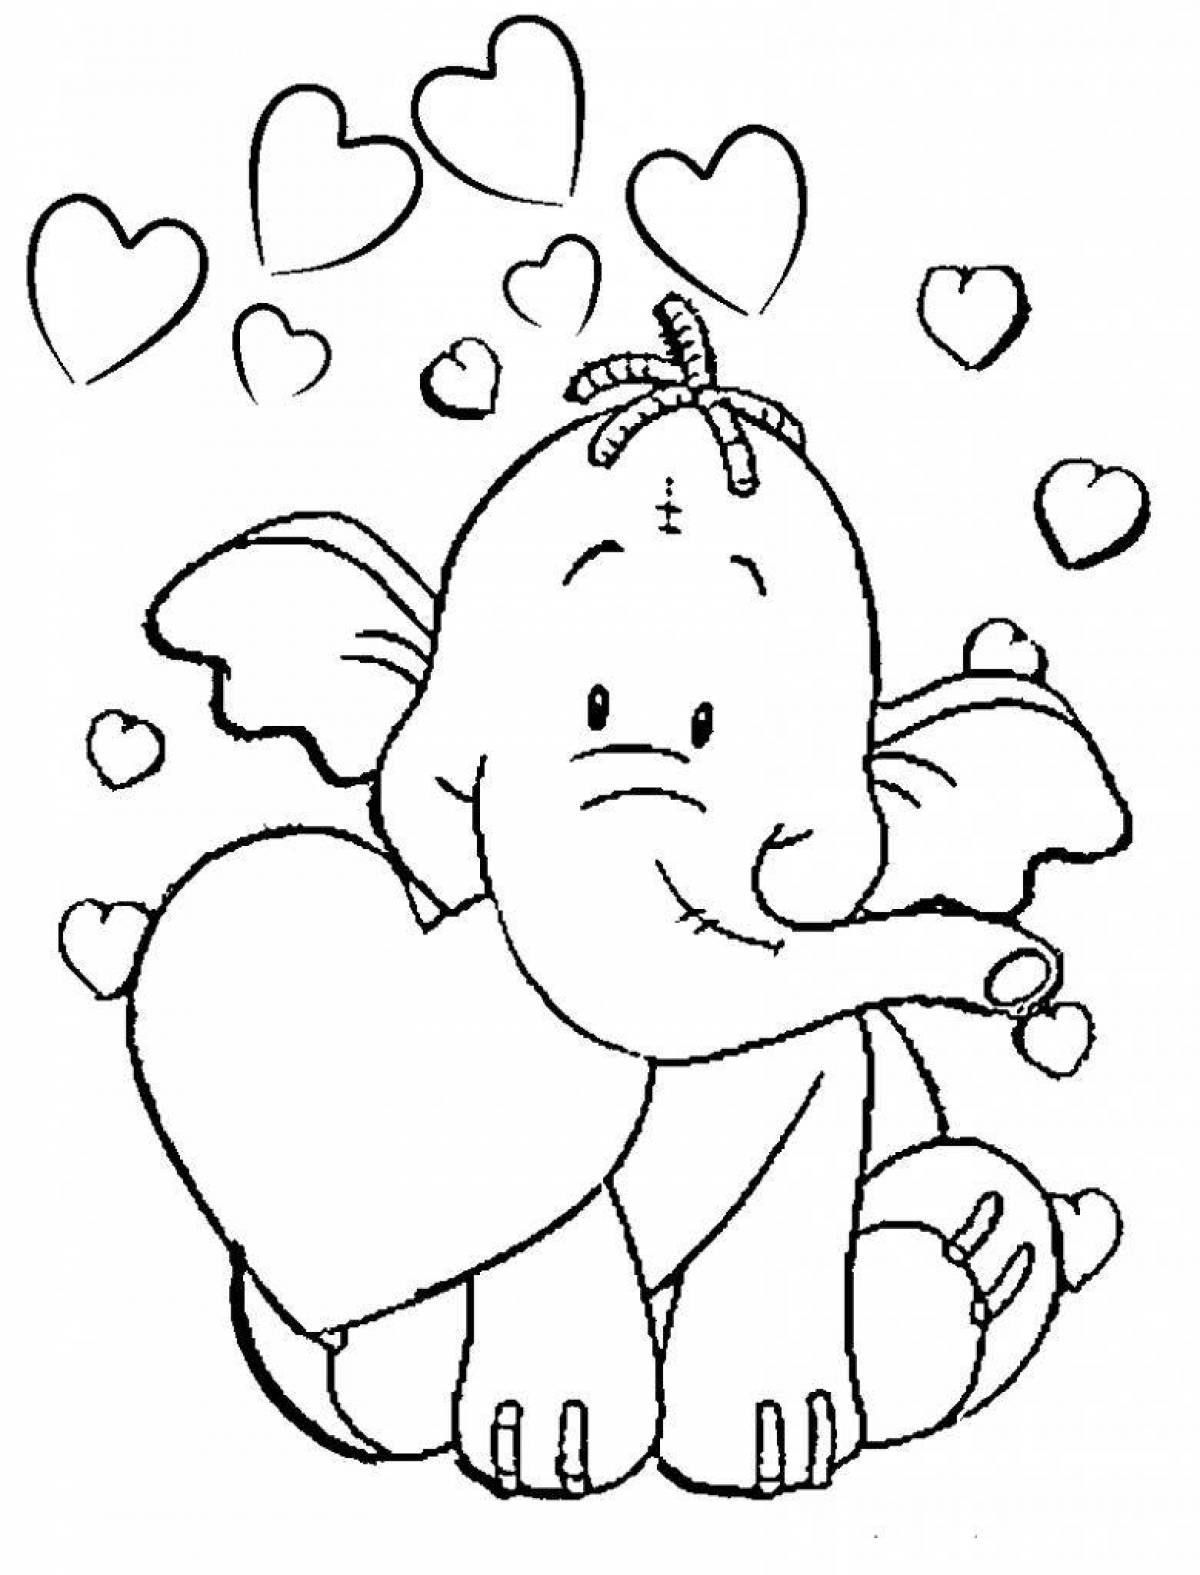 Fancy valentine's day coloring book for kids